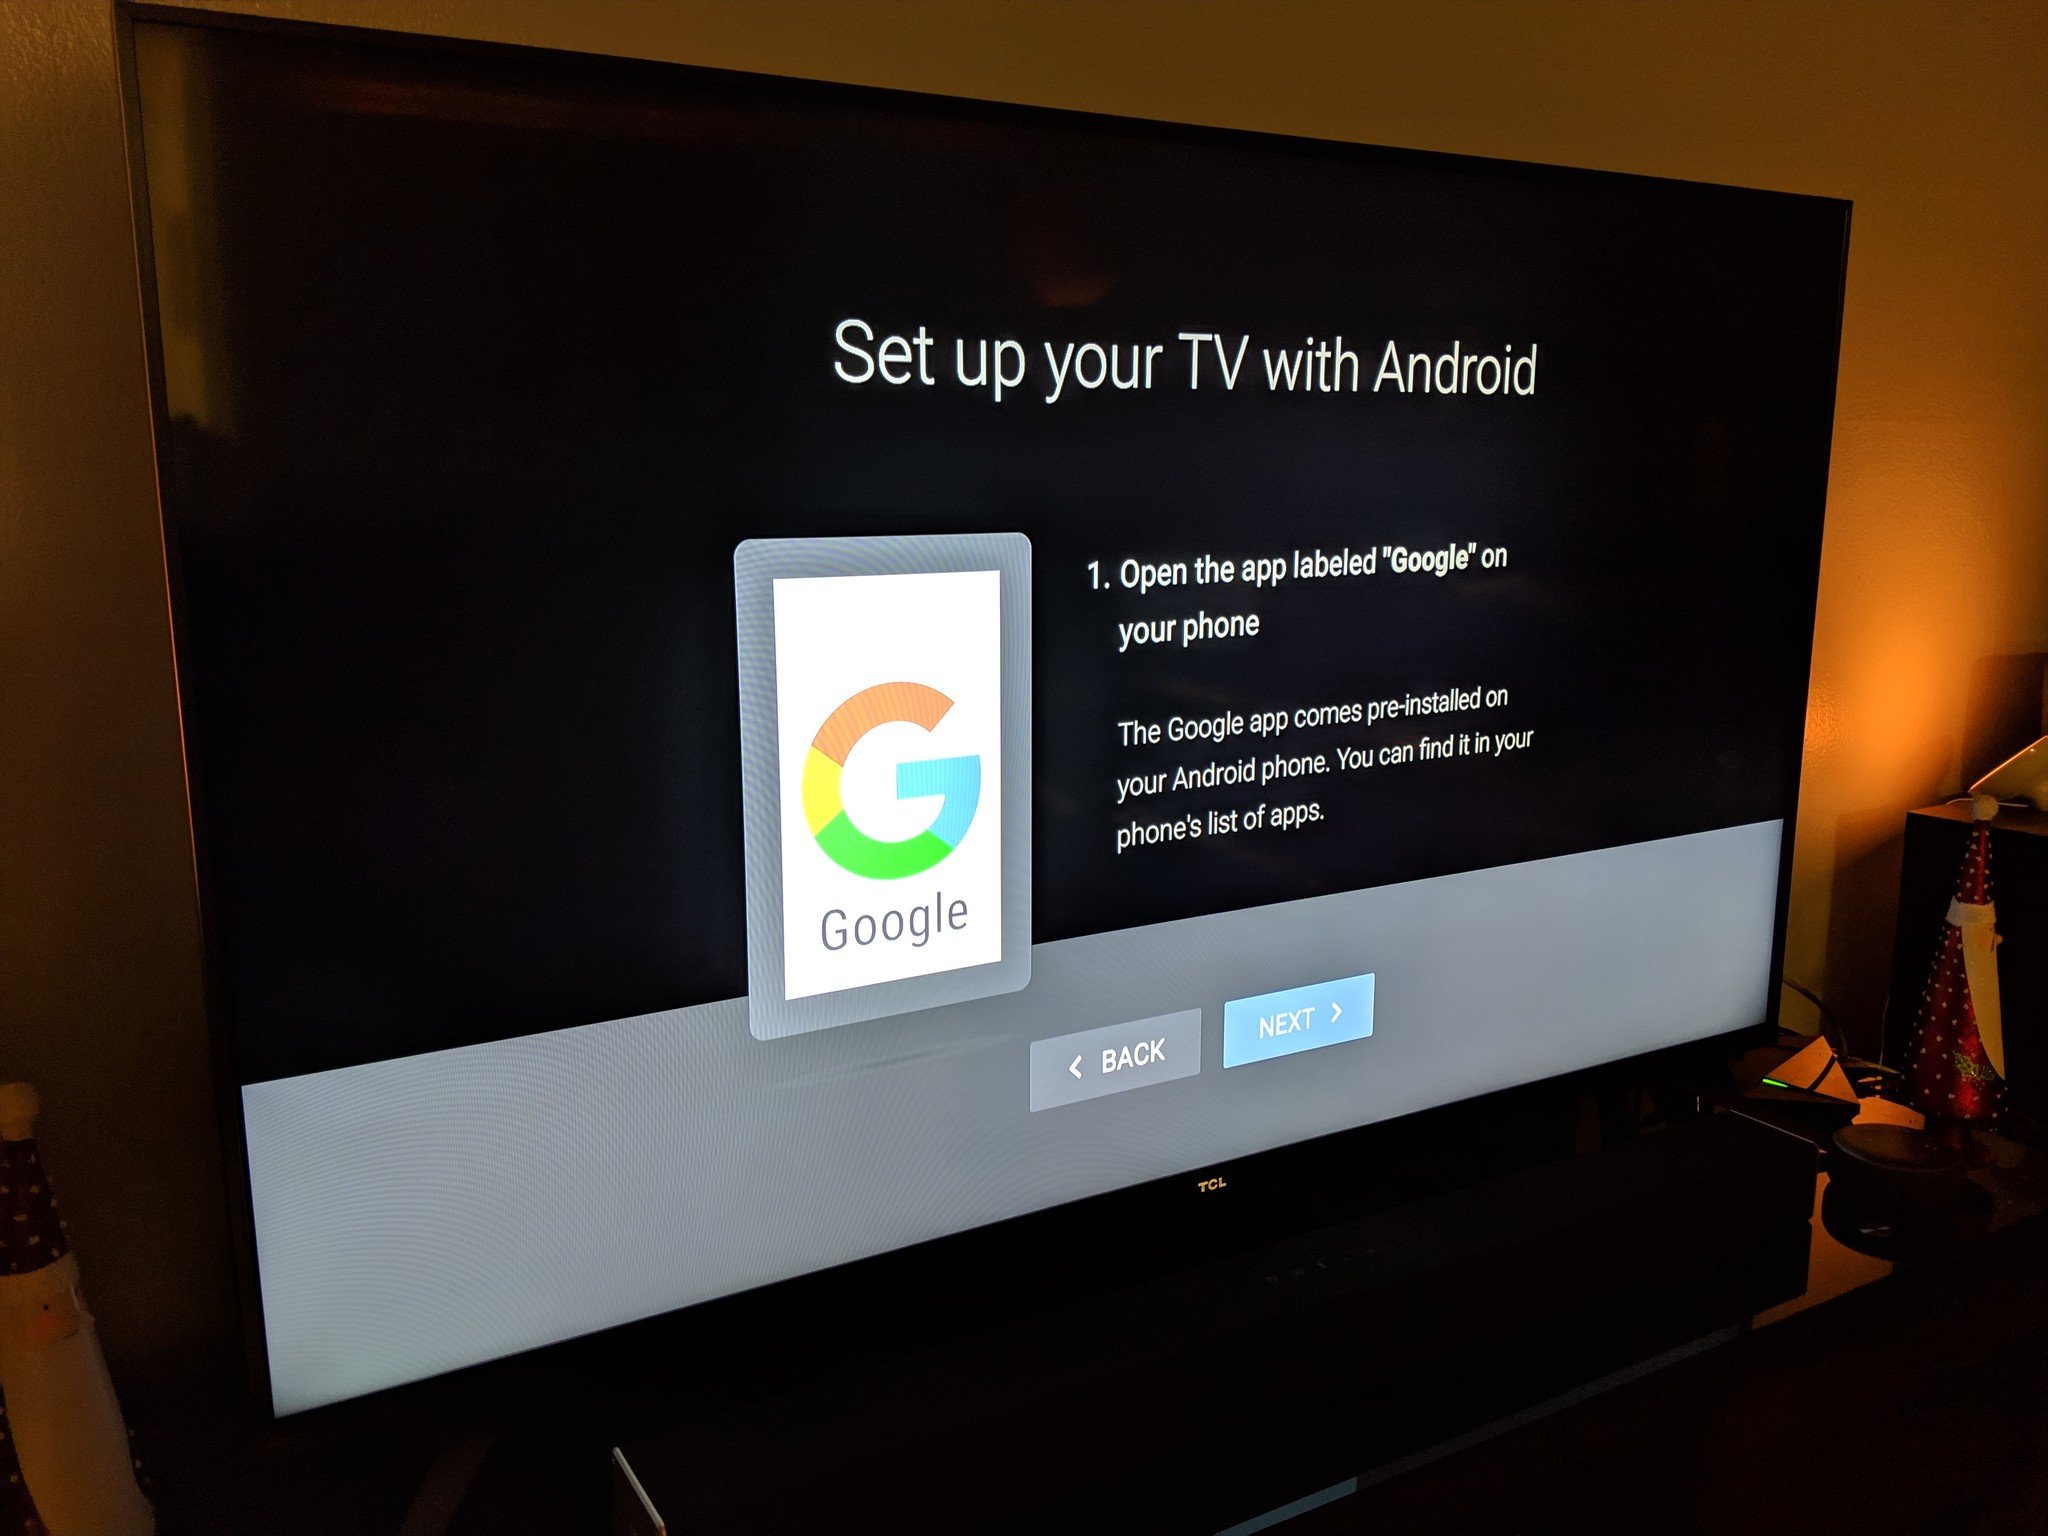 Google для андроид тв. Sign in with Google Android TV 2017.